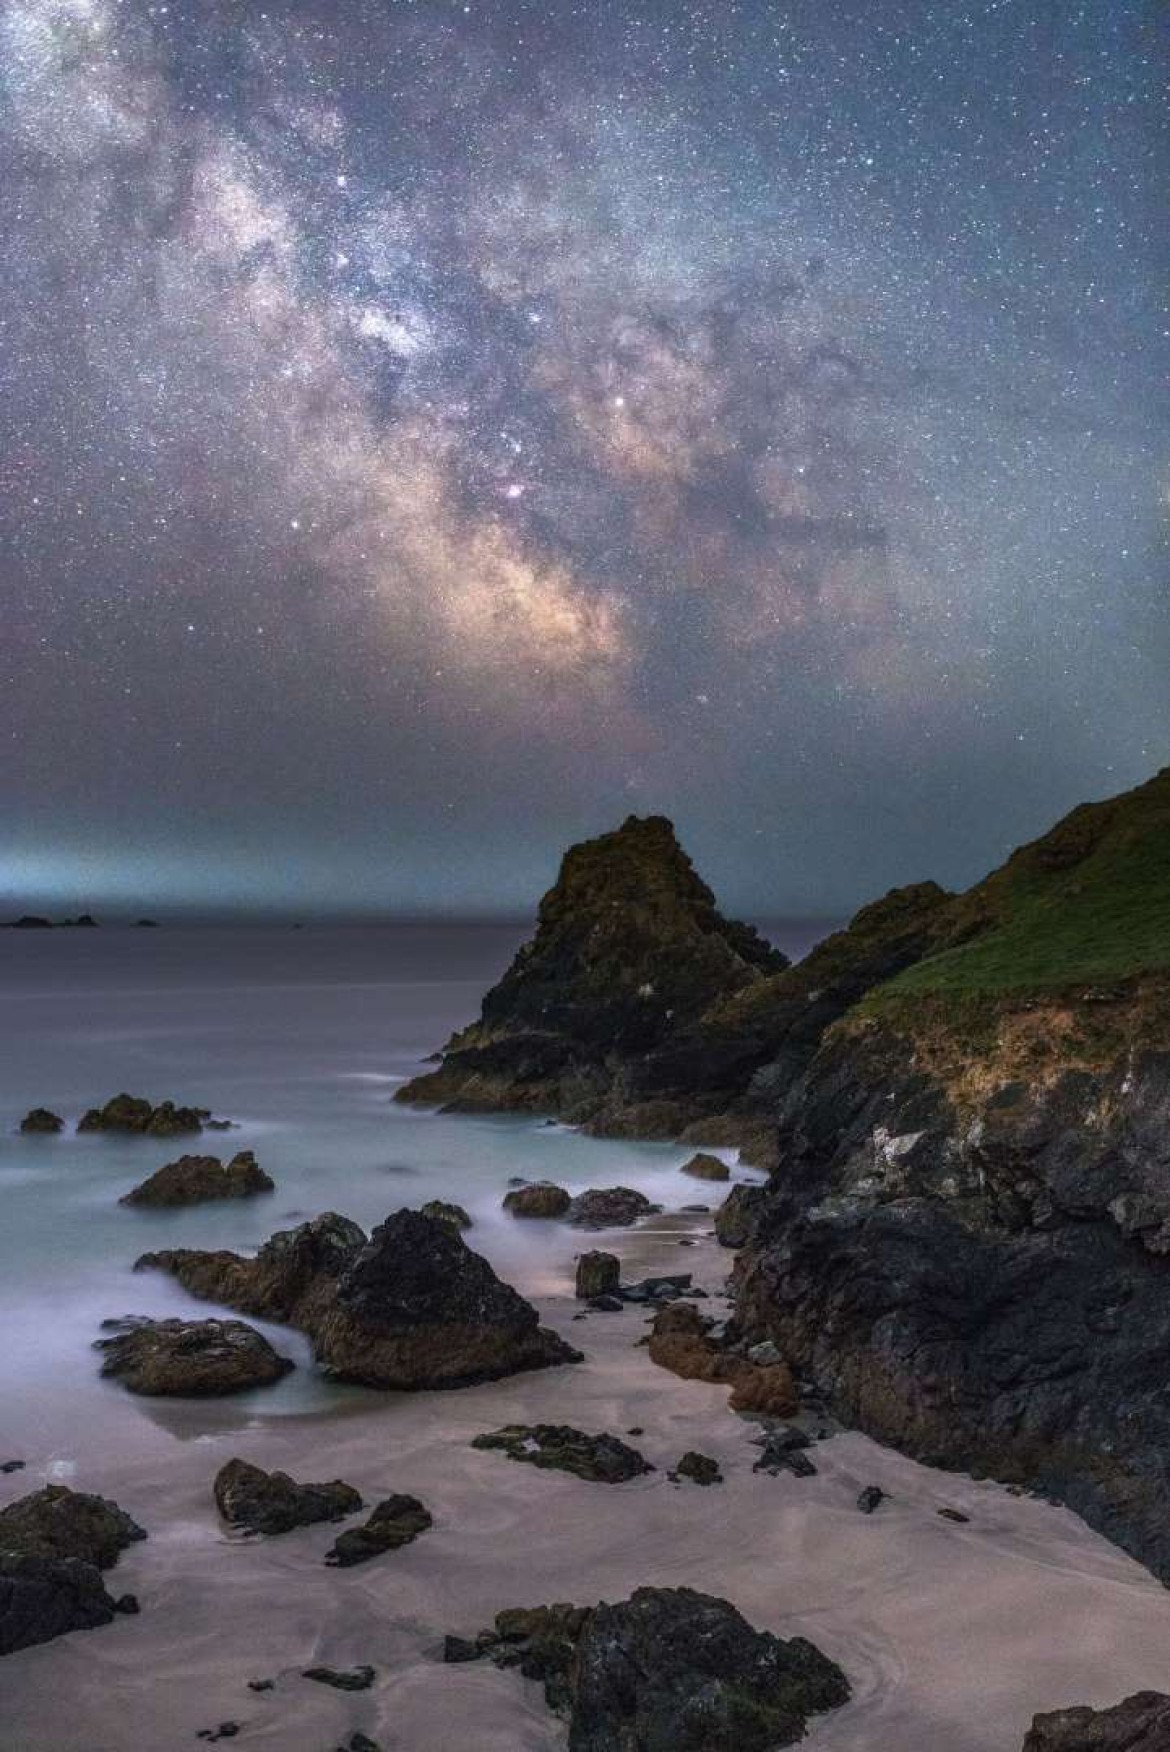 fot. Ainsley Bennet, "Kynance Cove" / Insight Investment Astronomy Photographer of the Year 2018